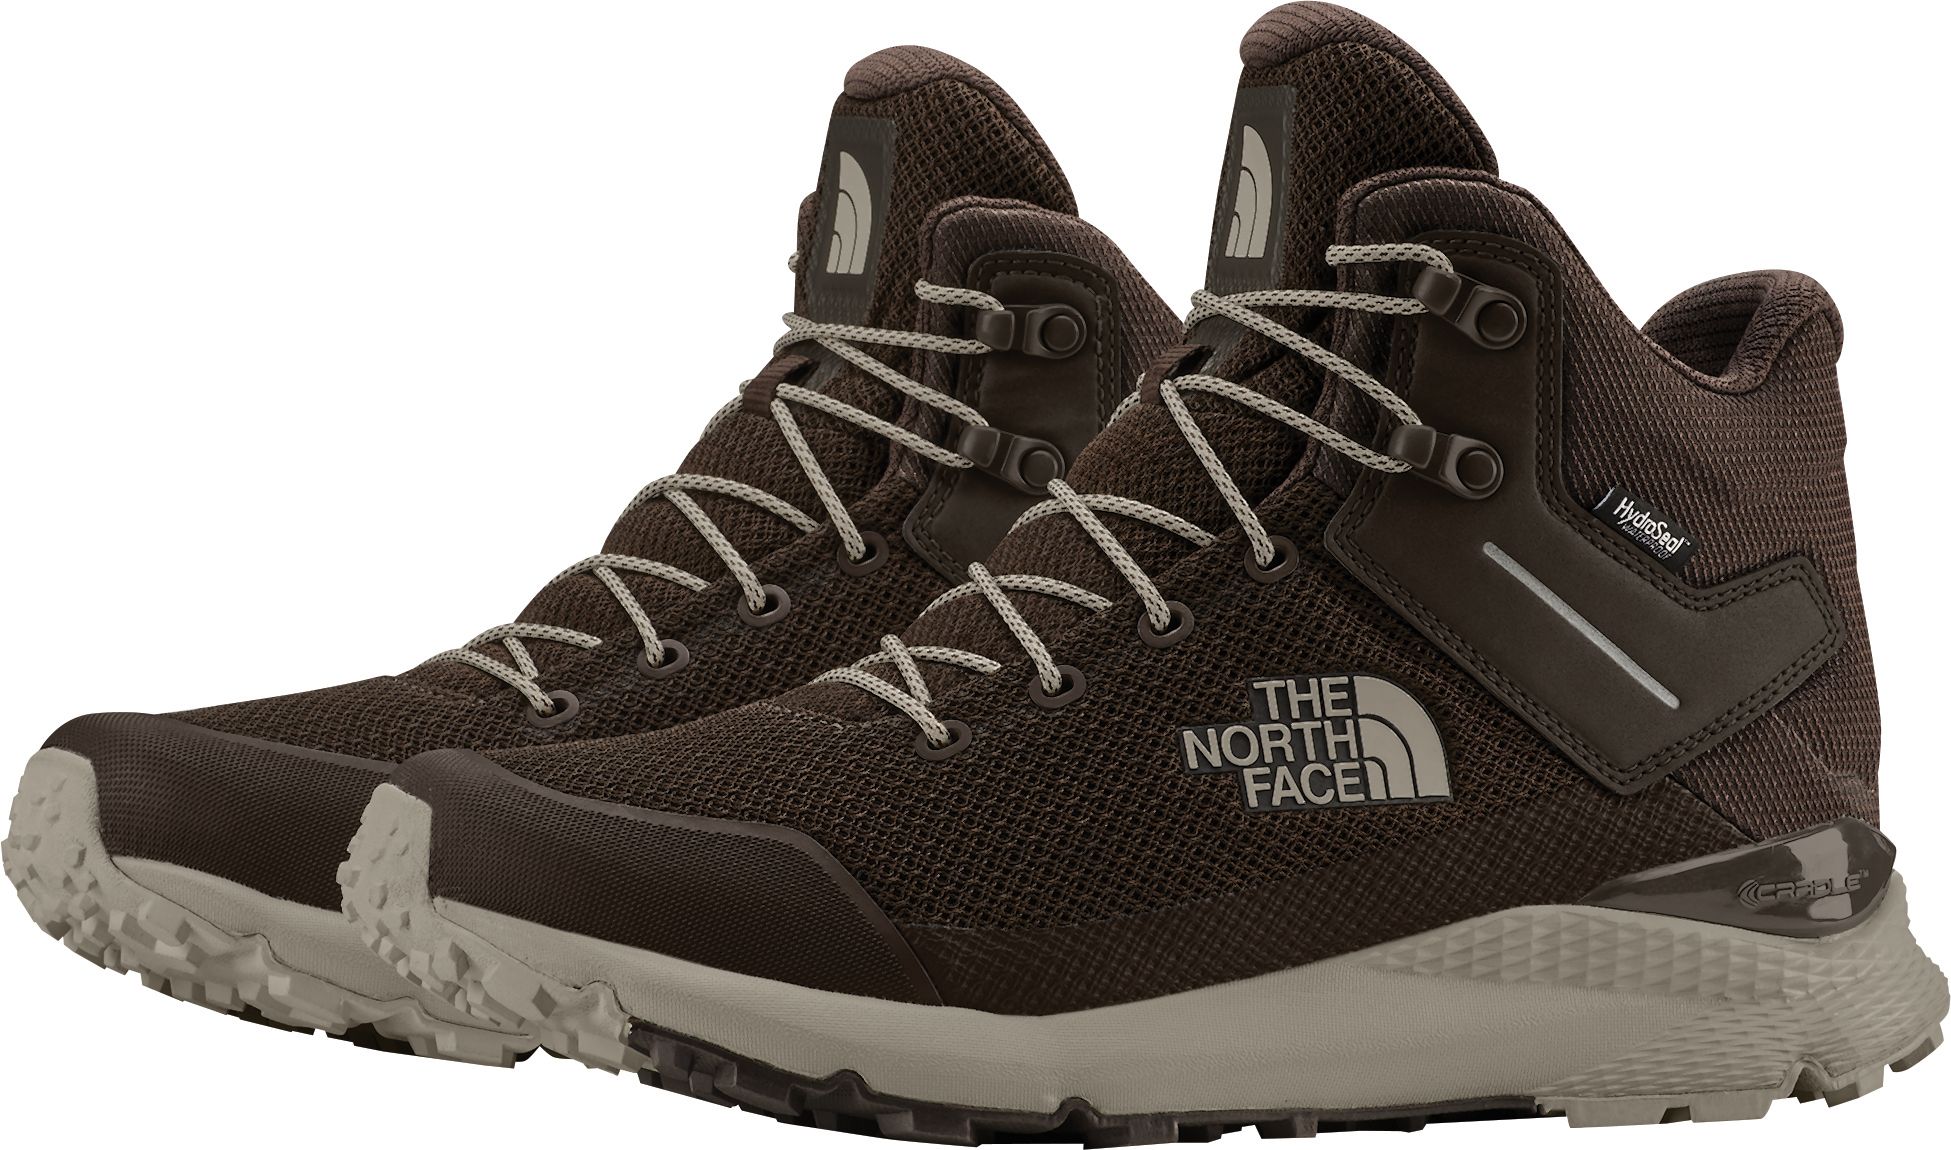 Vals Mid Waterproof Hiking Boots 